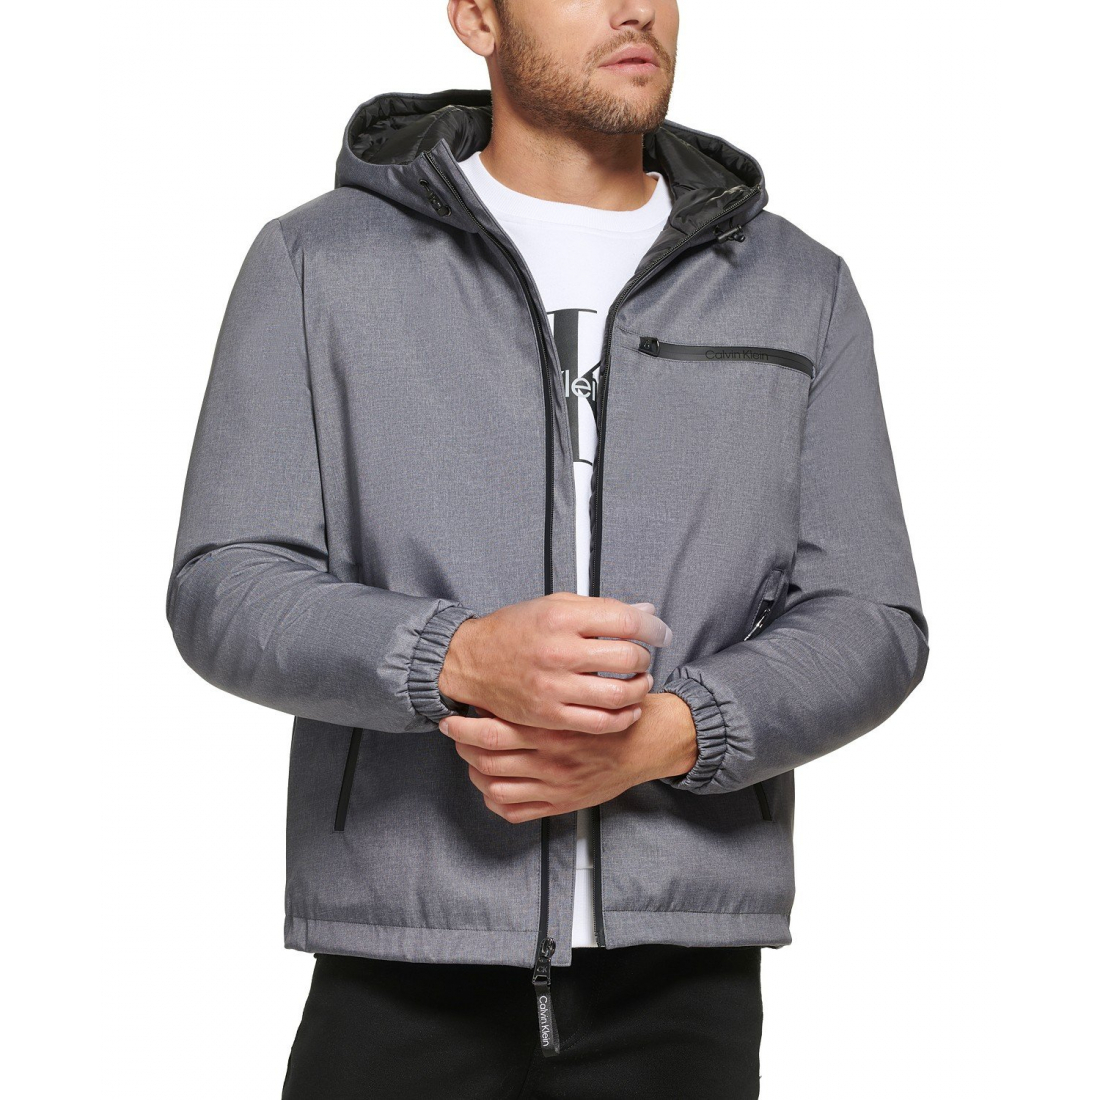 Veste 'Infinite Stretch Water-Resistant Hooded' pour Hommes